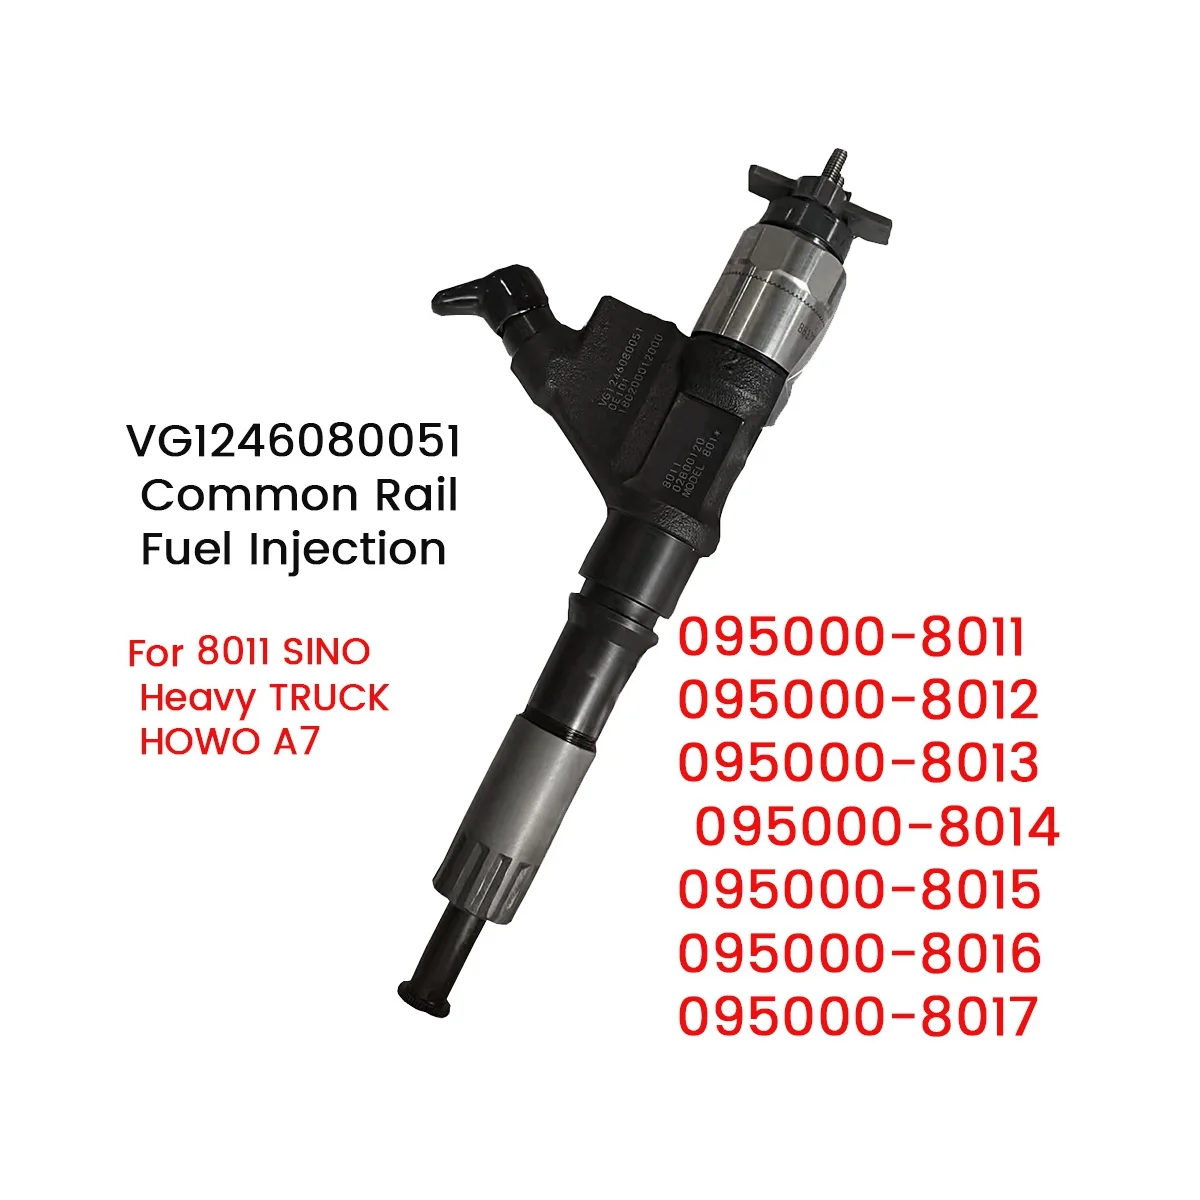 

095000-8011 Diesel Injector for DENSO 8011 SINO Heavy TRUCK HOWO A7 VG1246080051 Common Rail Fuel Injector 0950008011